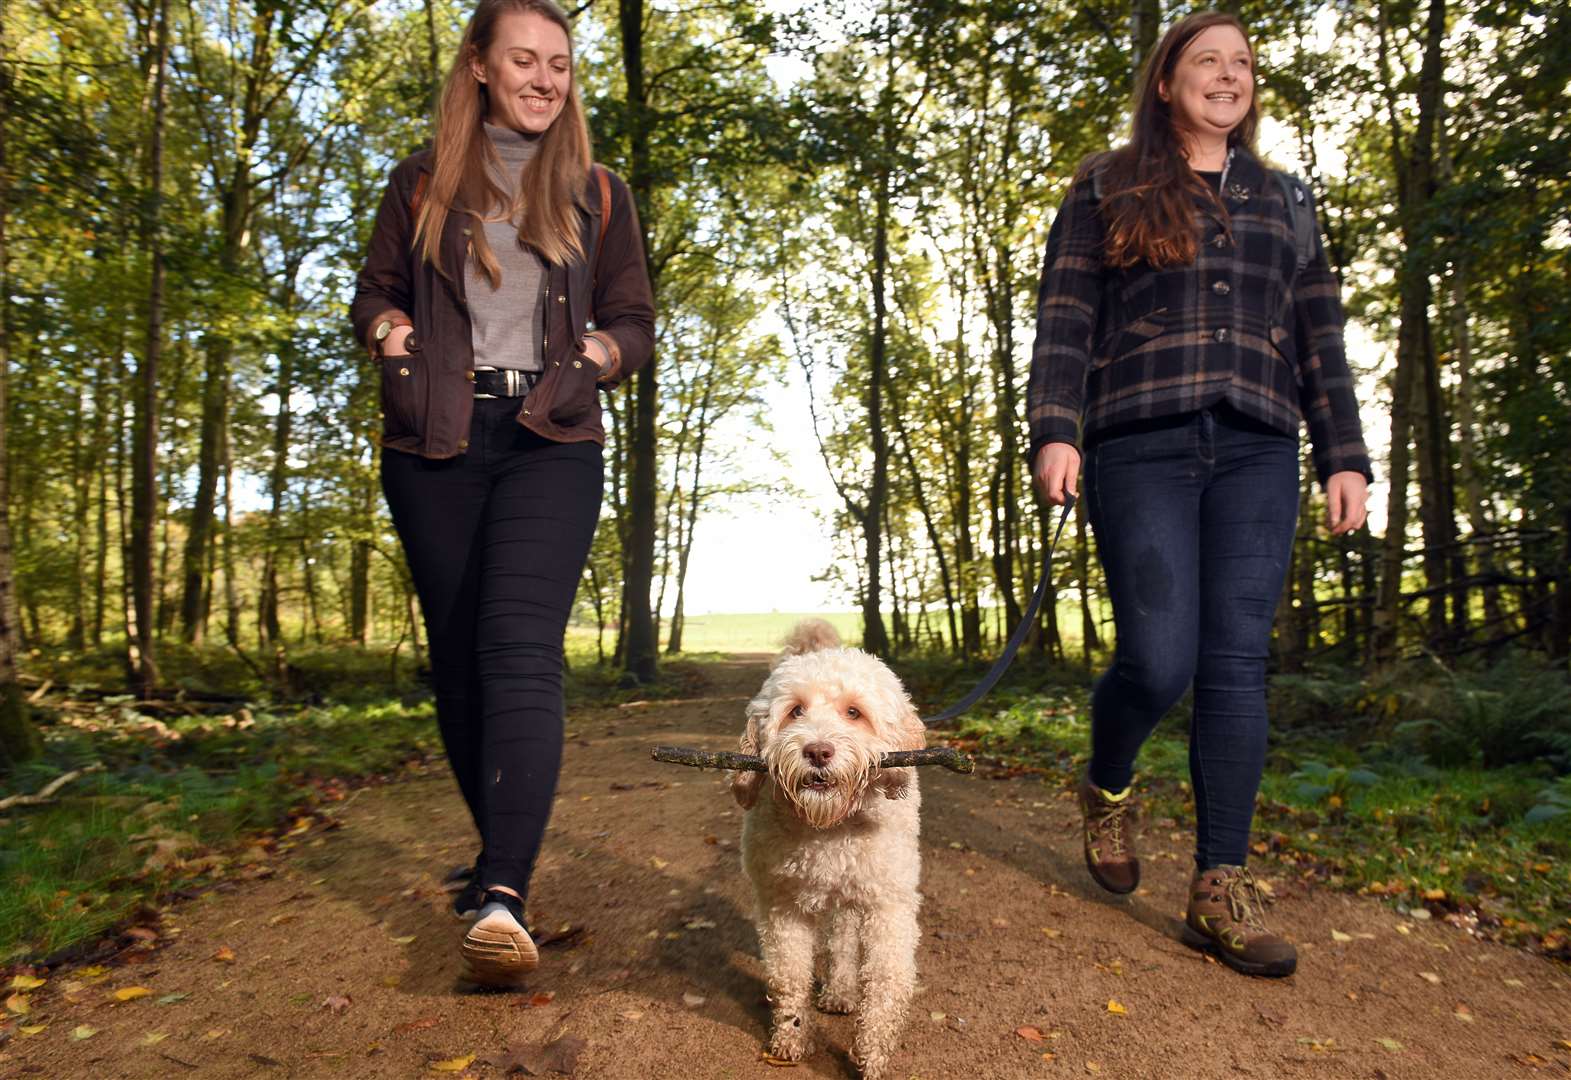 Pooch Passport launched for dog walkers